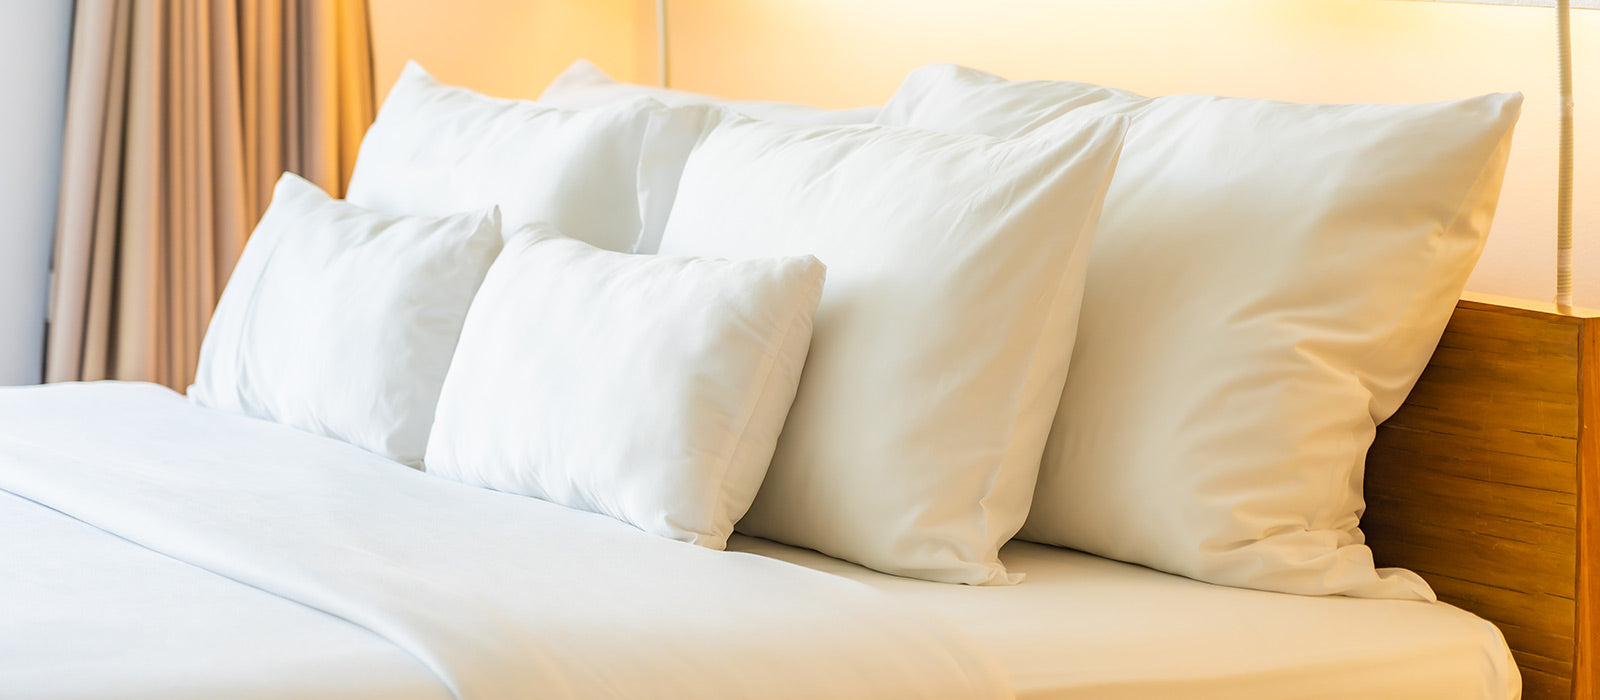 How To Choose The Right Pillow For Good Sleep